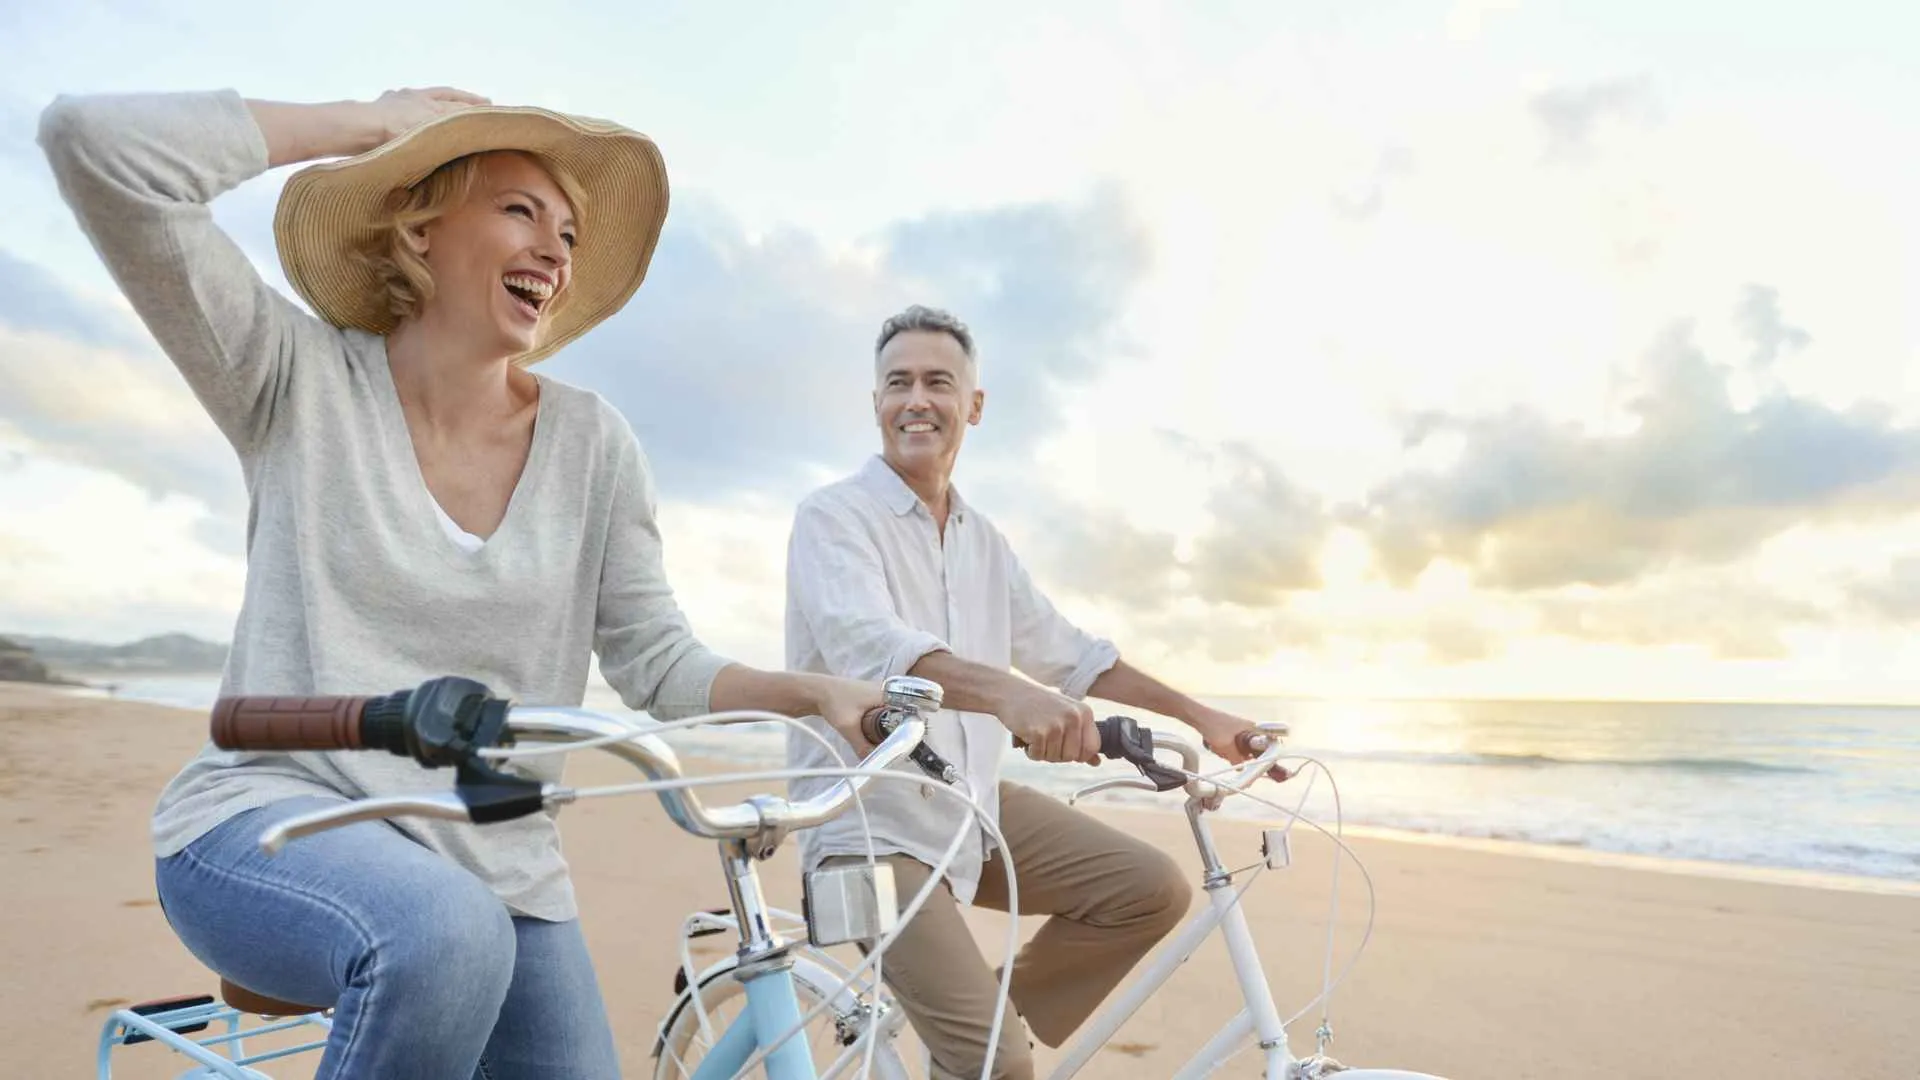 Mature couple cycling on the beach at sunset or sunrise.